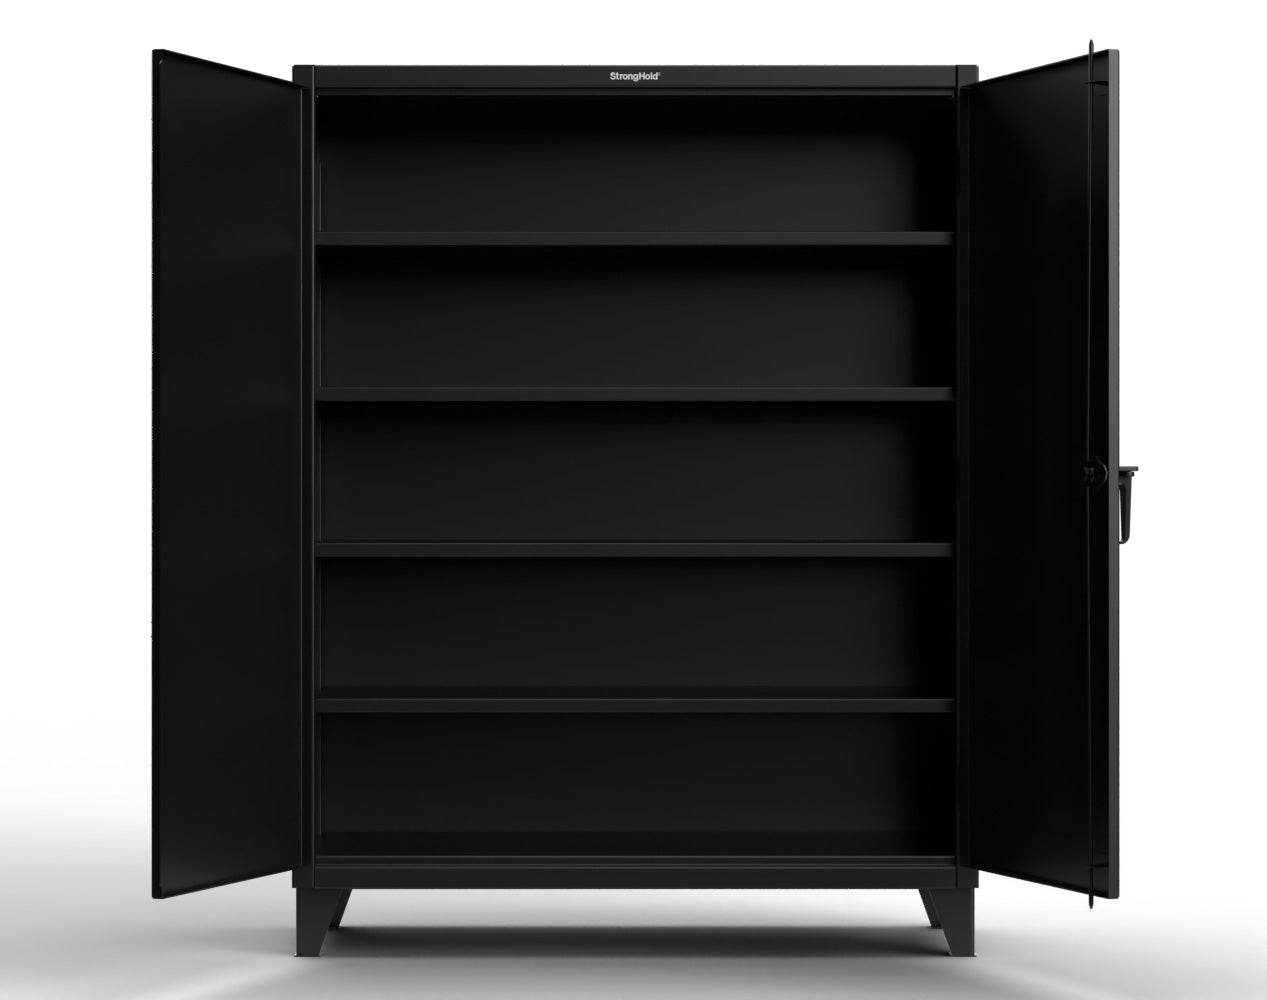 Extreme Duty 12 GA Cabinet with 4 Shelves – 60 In. W x 24 In. D x 78 In. H